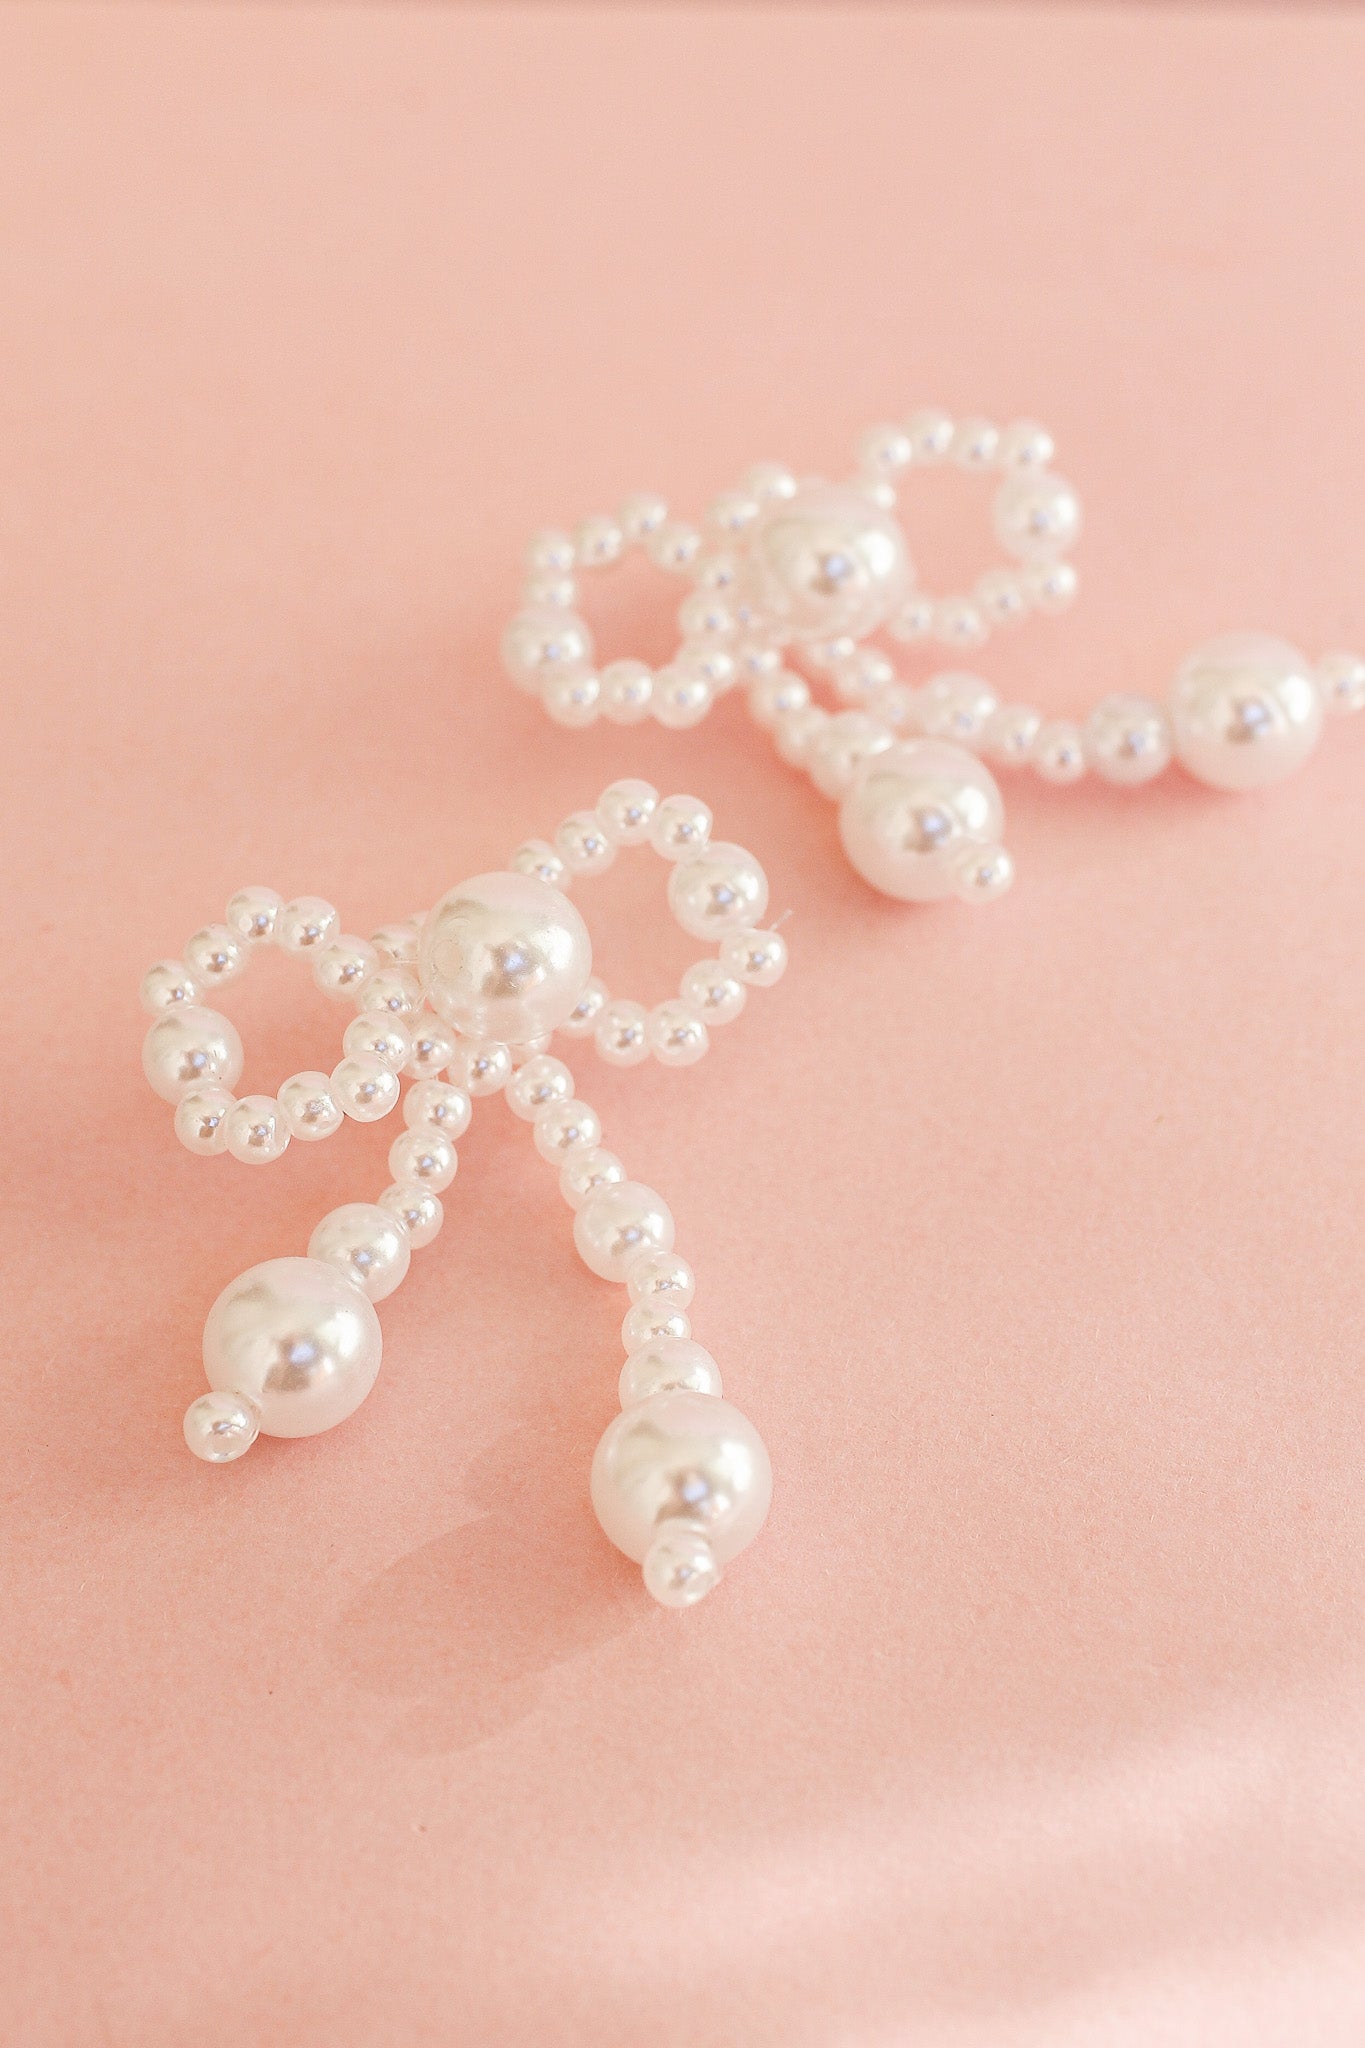 Melody Bow Earring in Pearl